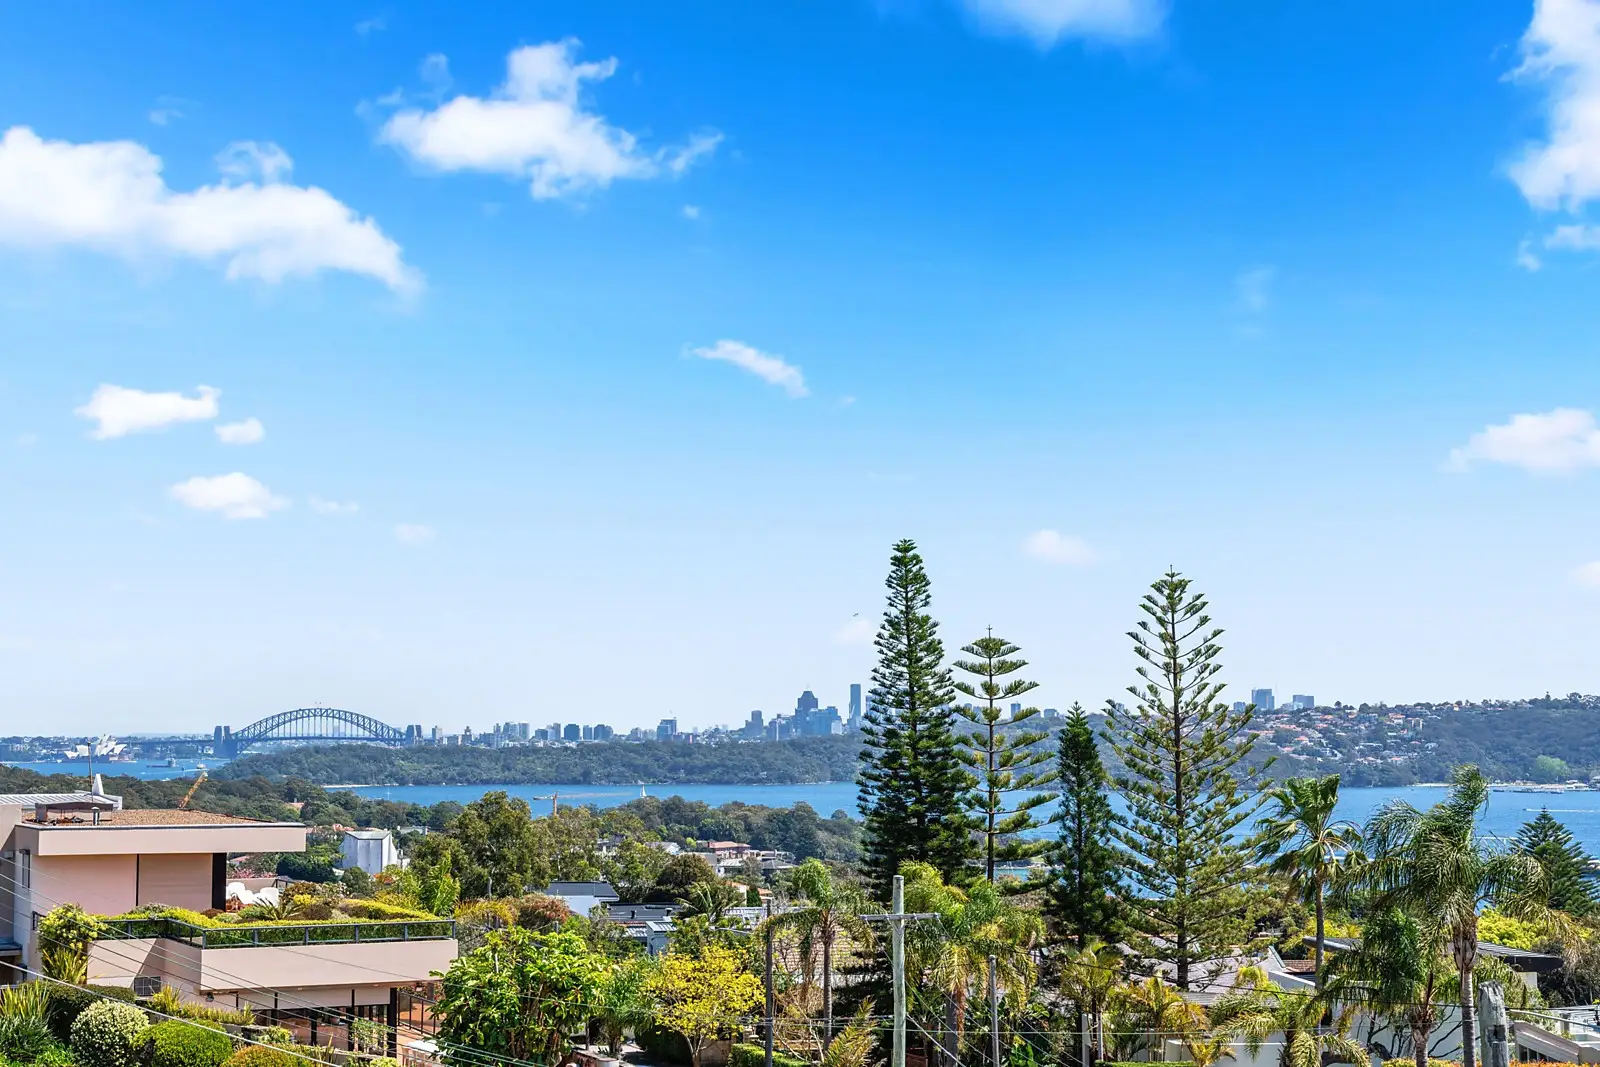 Photo #1: 56 Kings Road, Vaucluse - Sold by Sydney Sotheby's International Realty